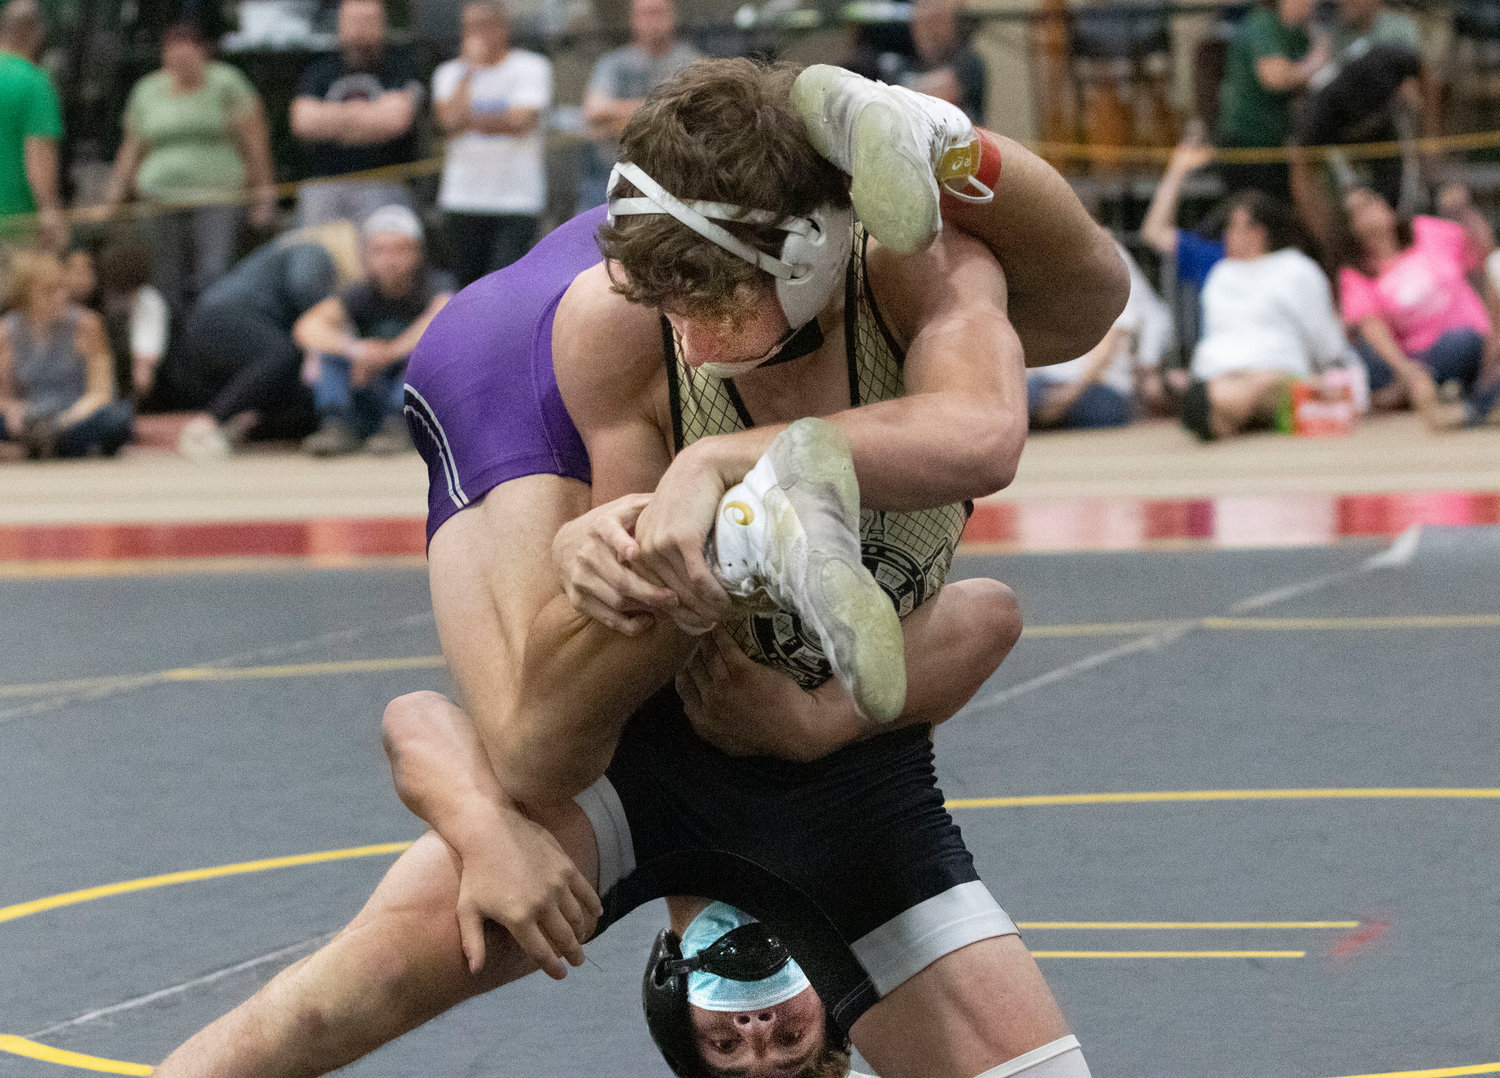 Brock Pacheco hangs on, after getting flipped over the shoulder of opponent, Aidan Zarella, during the finals.